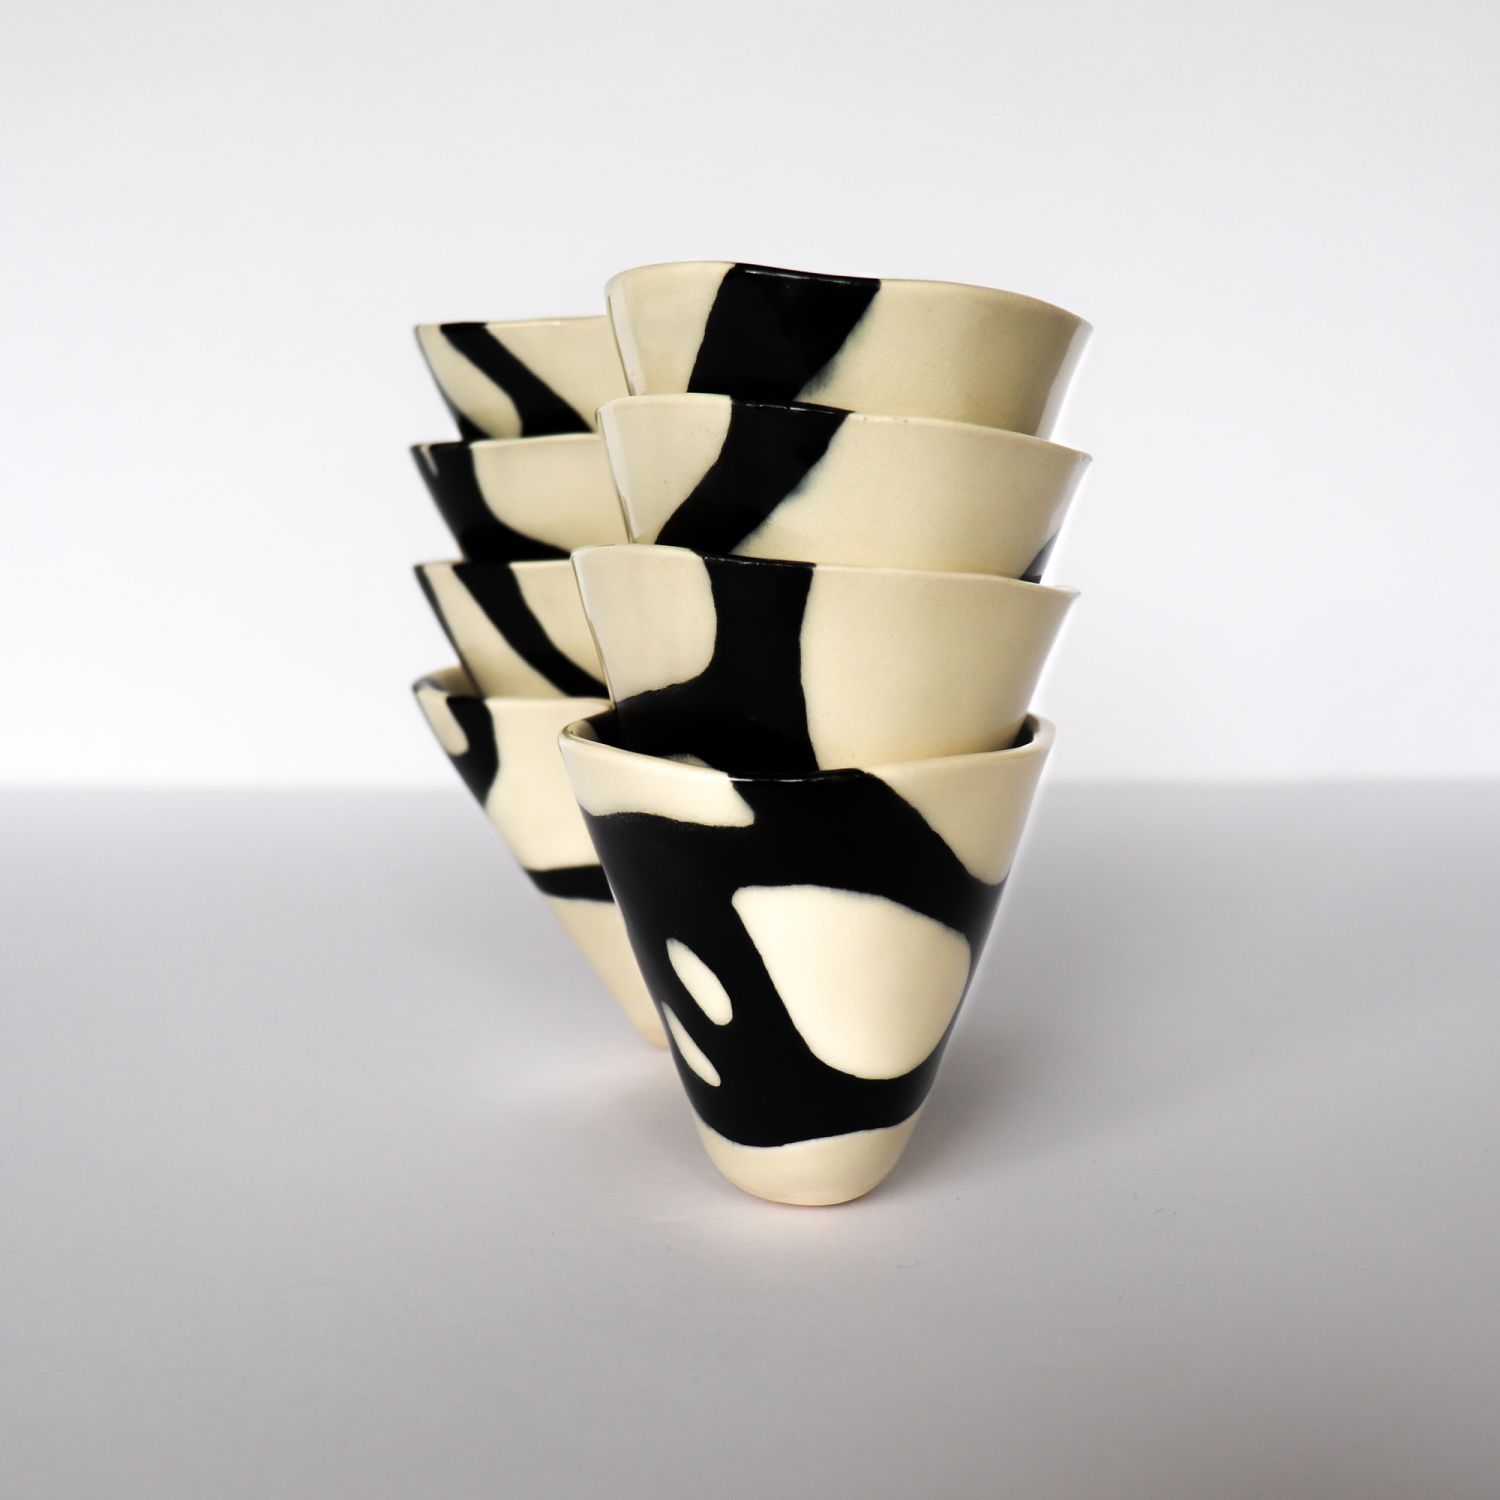 Alana Marcoccia: Interconnected Sculptural Bowl Product Image 3 of 12